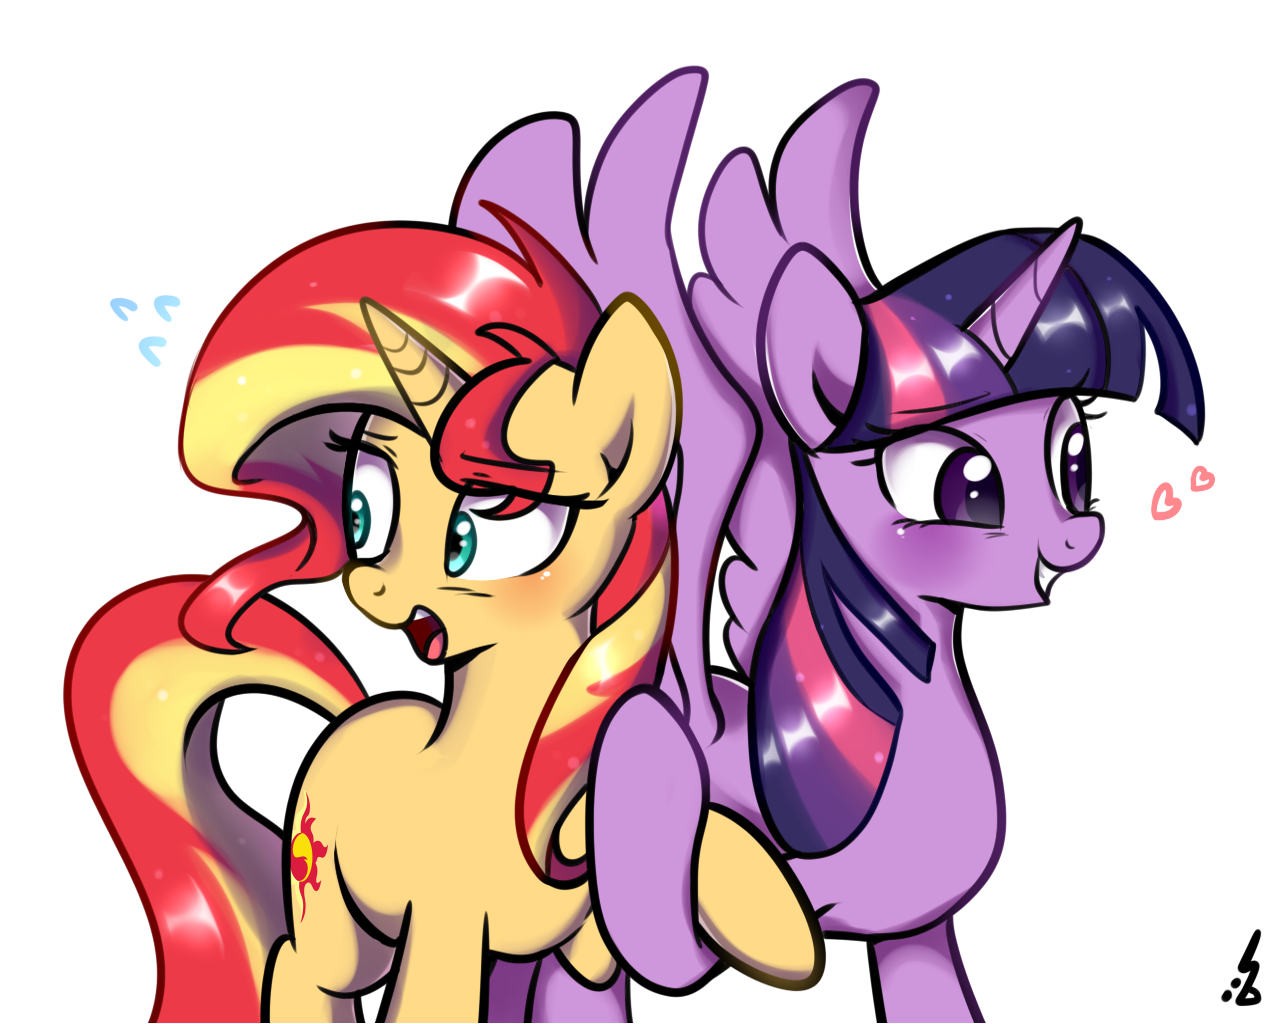 sunsetsparkle_by_haden_2375-darzo84.png